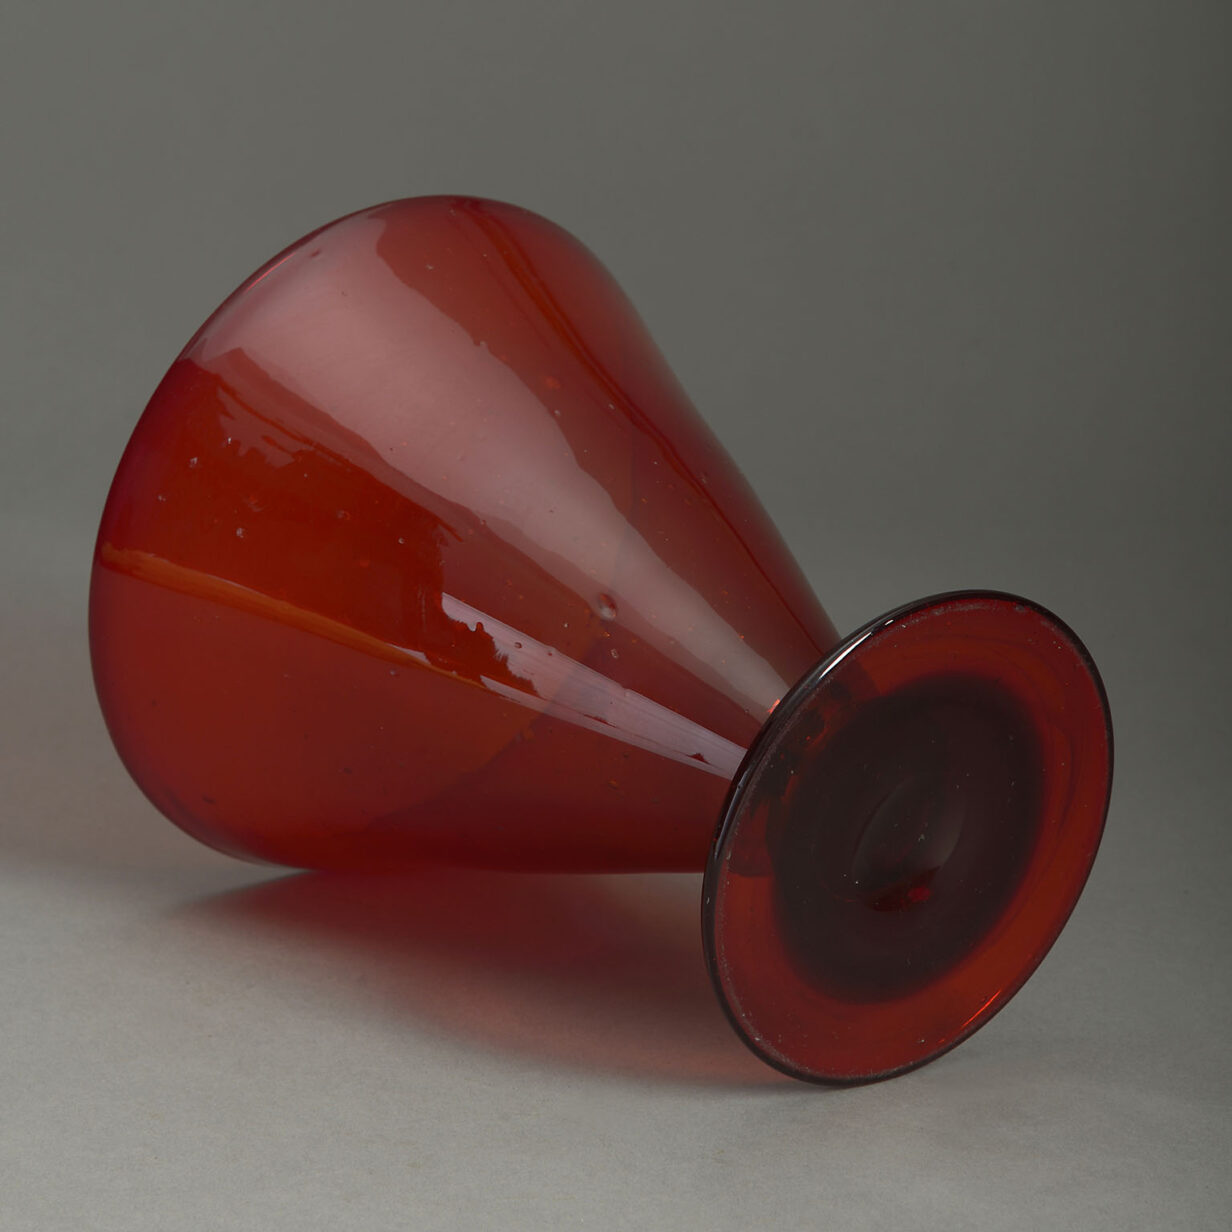 Conical red glass vase